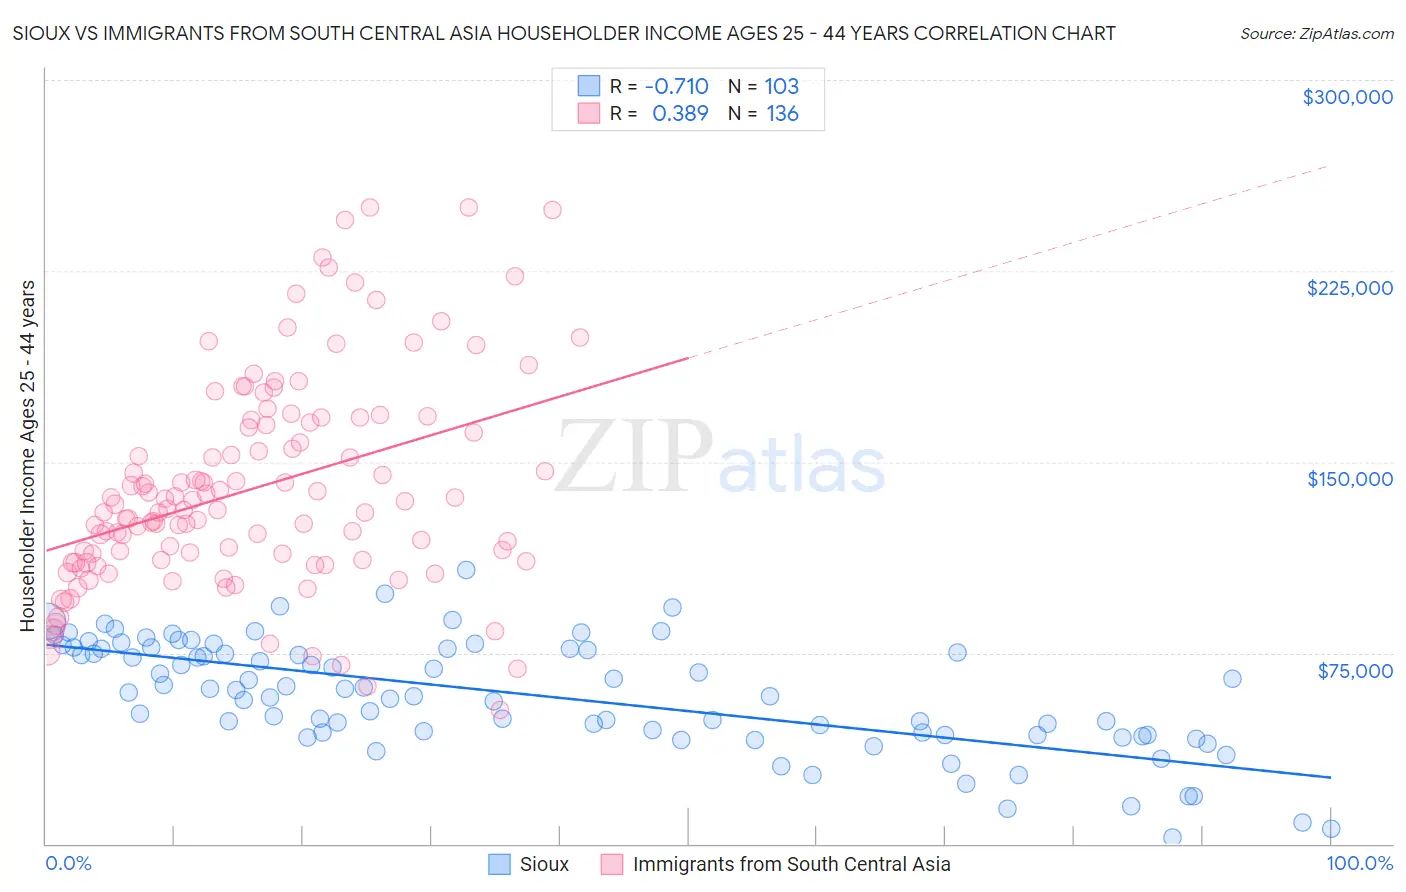 Sioux vs Immigrants from South Central Asia Householder Income Ages 25 - 44 years